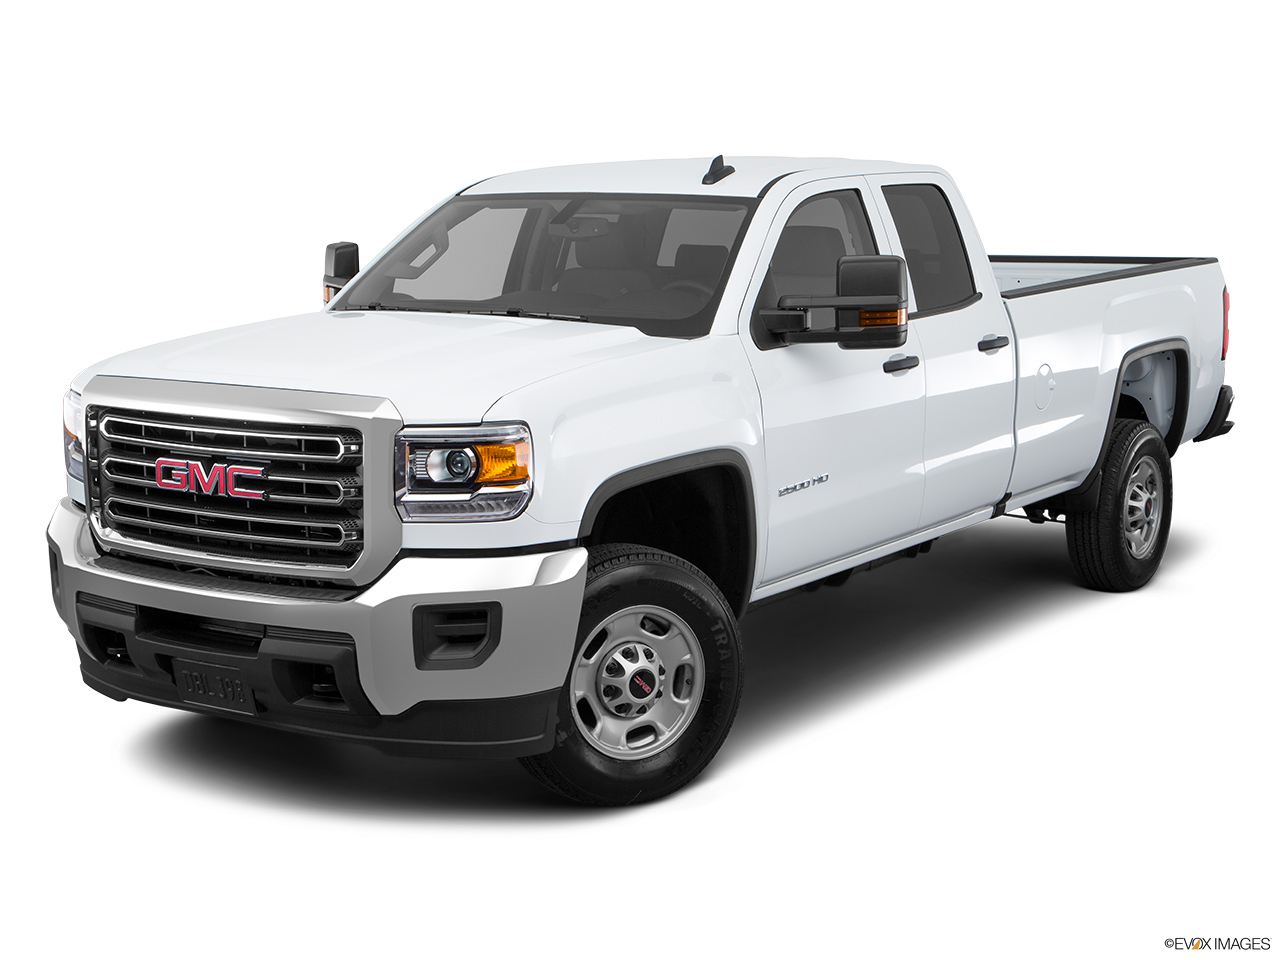 2016 GMC Sierra 2500HD Base Front angle view. 